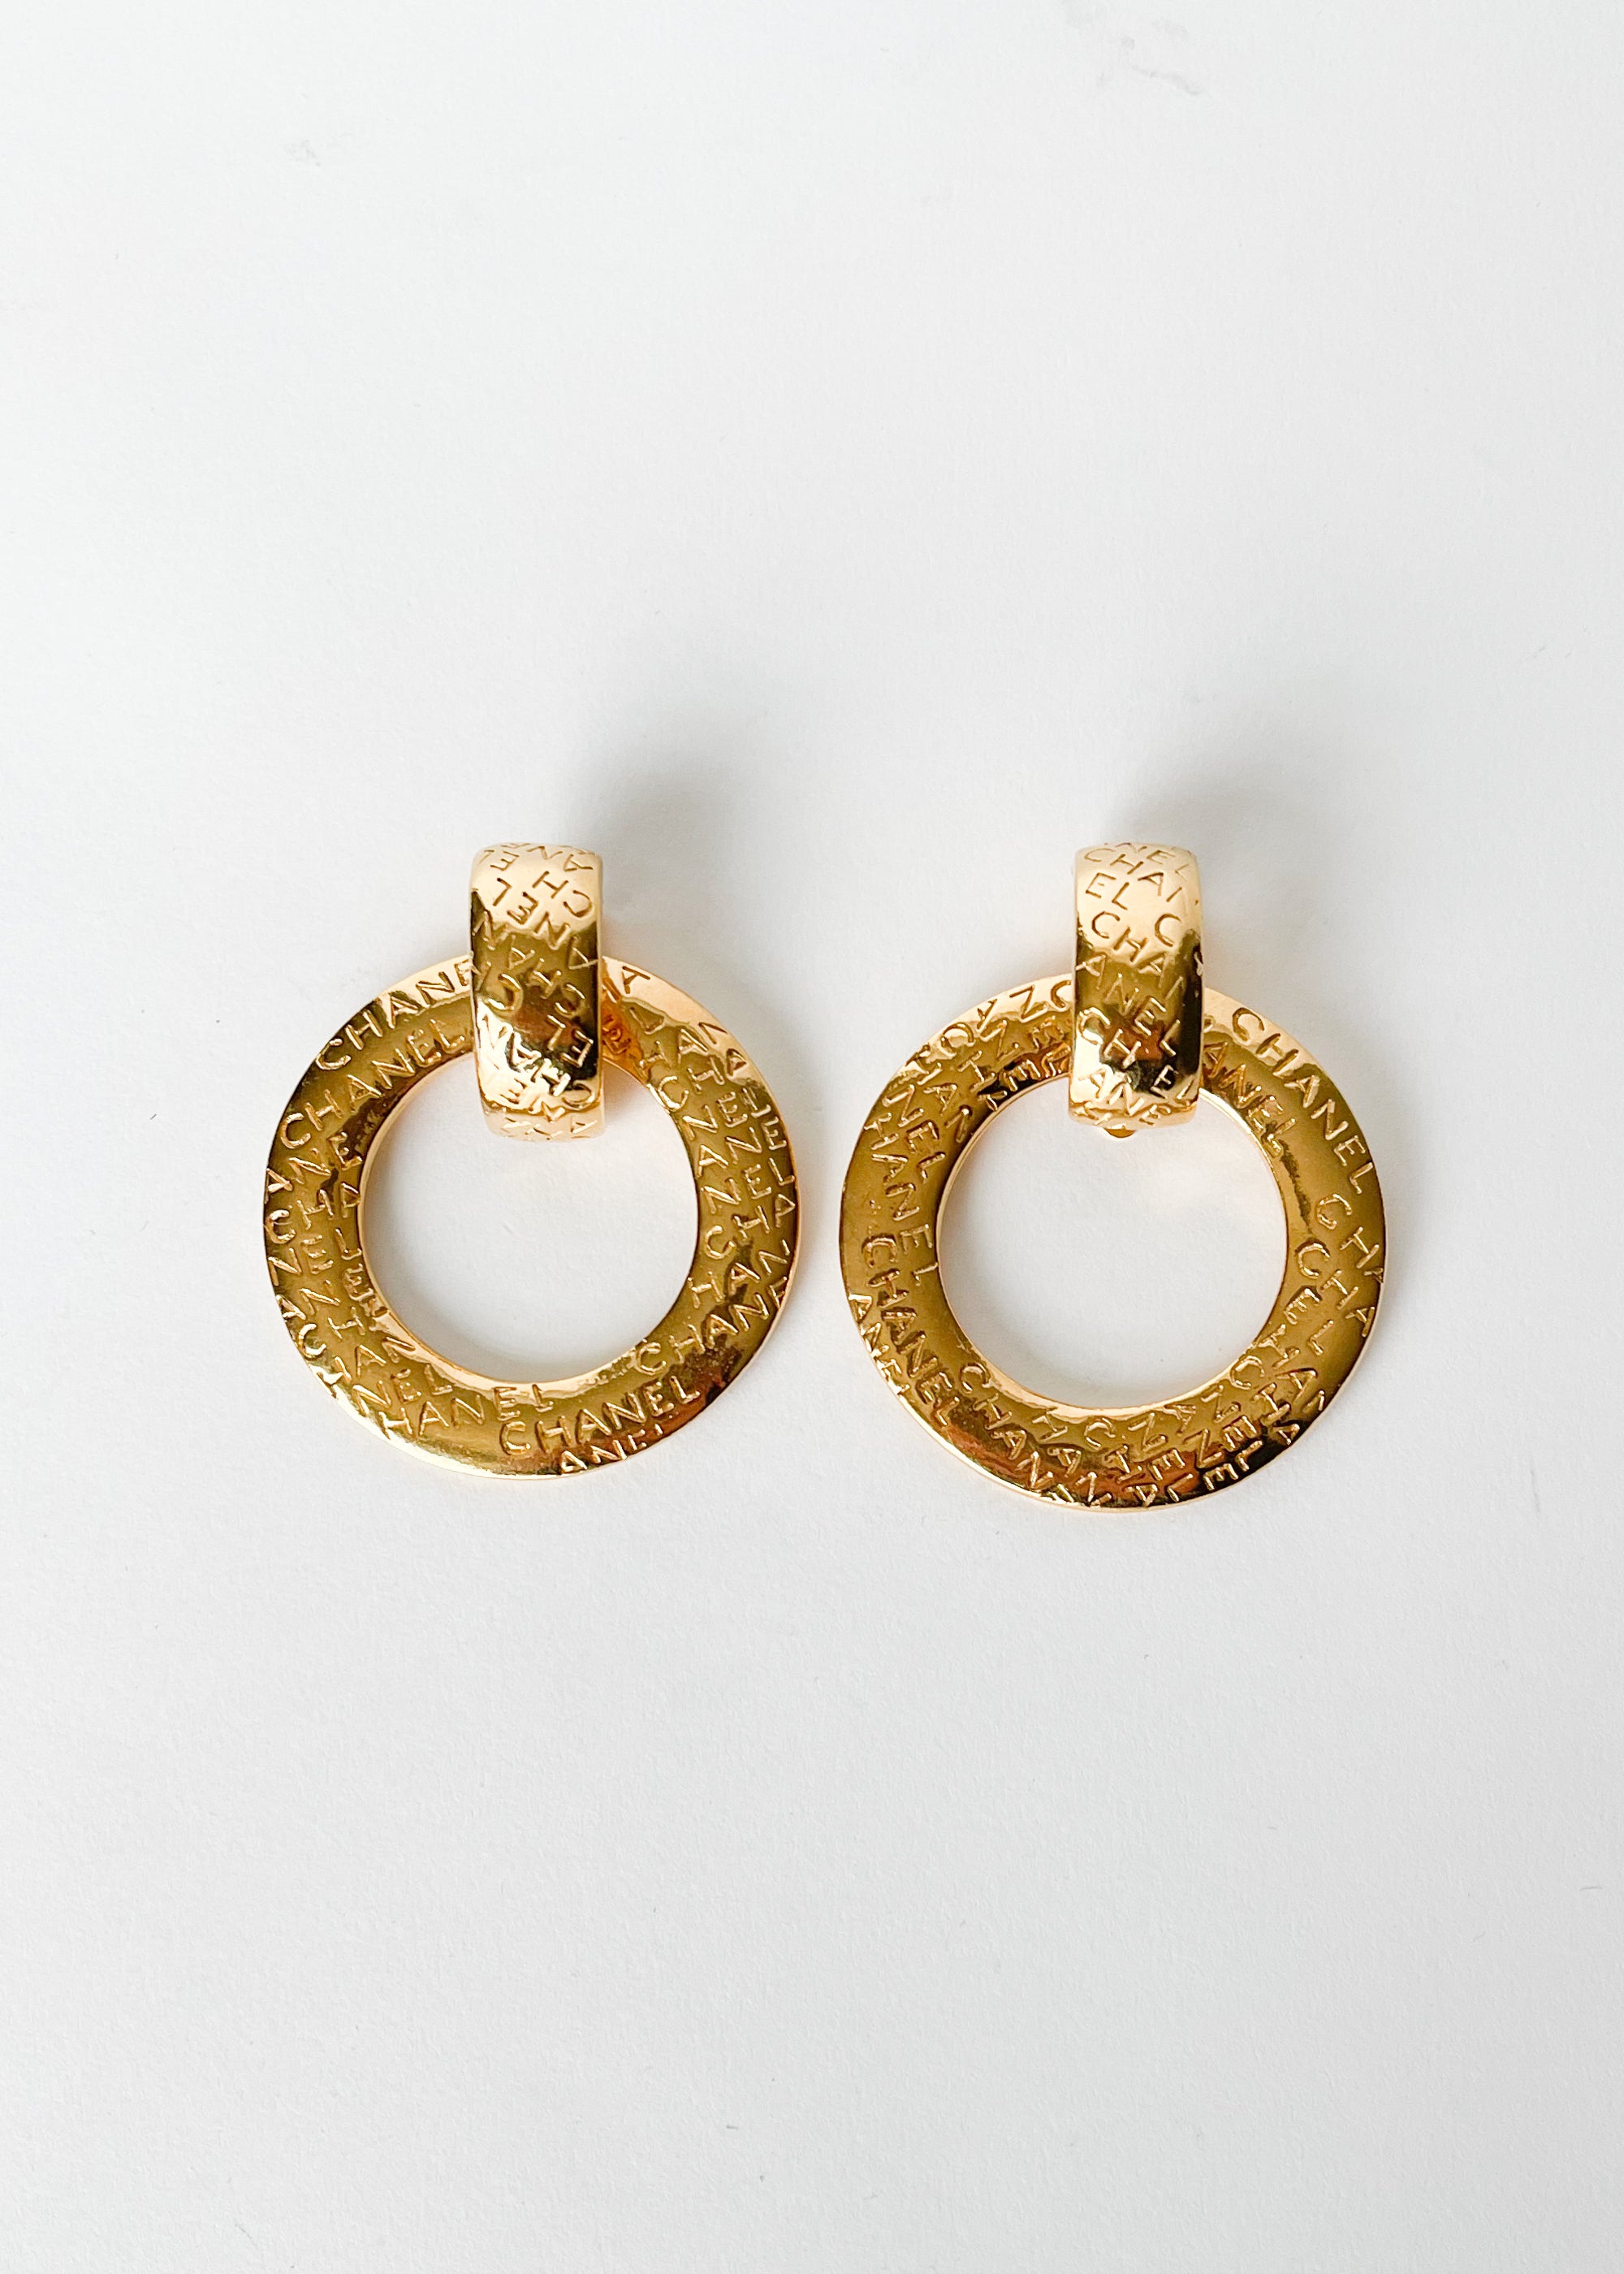 Sold at Auction: A pair of double C earrings marked Chanel Z2371 in original  box